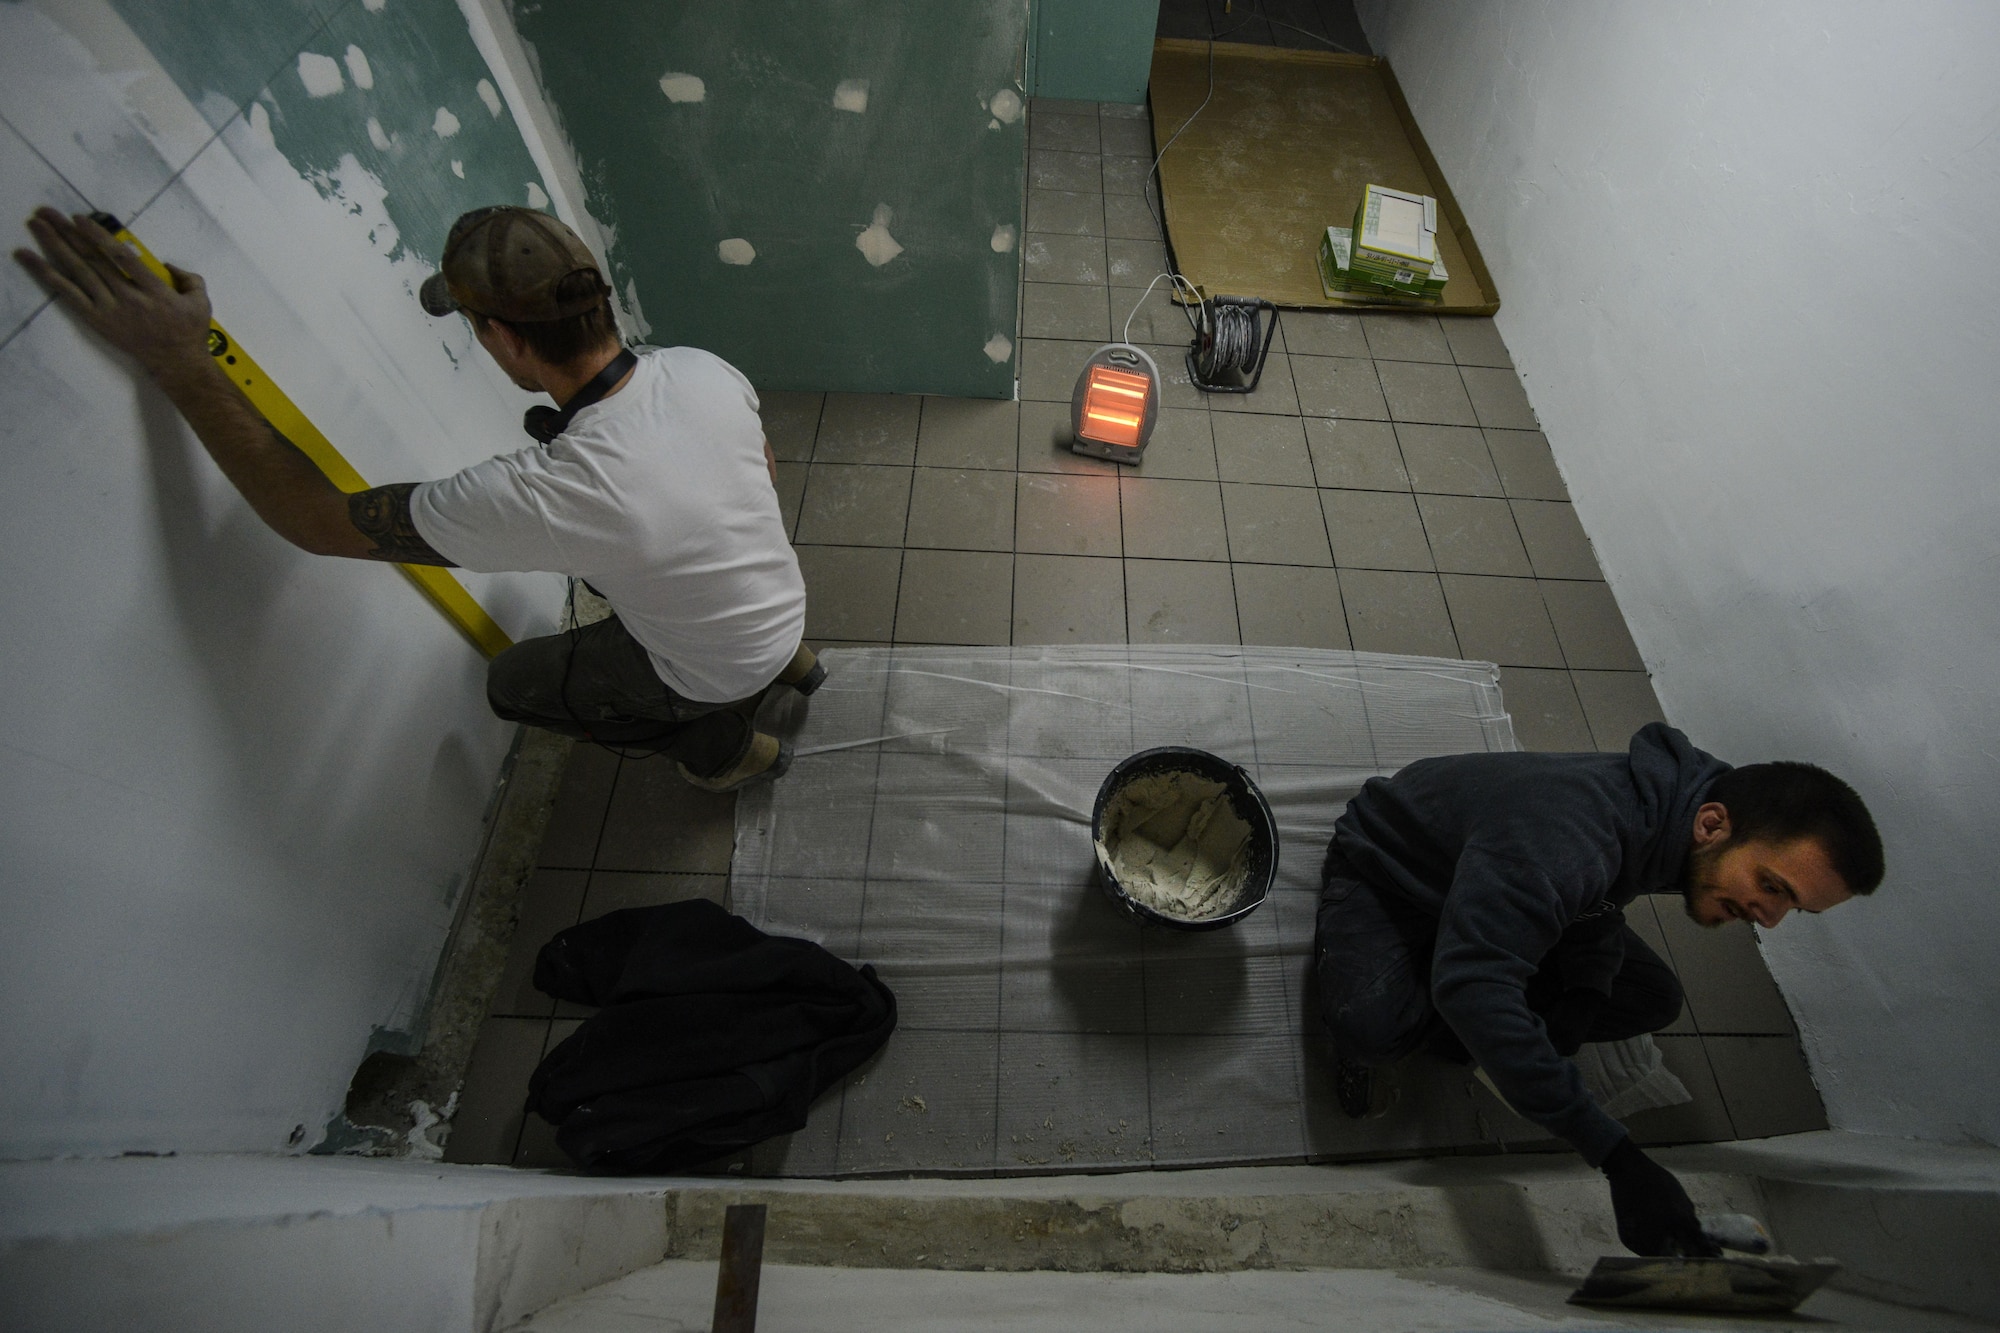 Senior Airman Bradley Cain and Staff Sgt. Dorsey Sirmans, both 435th Construction and Training Squadron structural craftsmen, renovate a locker room Oct. 18, 2015, at Liceul Teoretic Alexei Mateevici School in Sanatauca, Moldova. At least seven Airmen from the 435th CTS and the 52nd Civil Engineer Squadron have been working on the renovations since Sept. 23. The Moldova Humanitarian and Civic Assistance program is part of a military and civilian theater security cooperation program the U.S. European Command uses to directly impact civilian communities throughout 17 countries, primarily in Eastern Europe. (U.S. Air Force photo/Senior Airman Nicole Sikorski)

 
